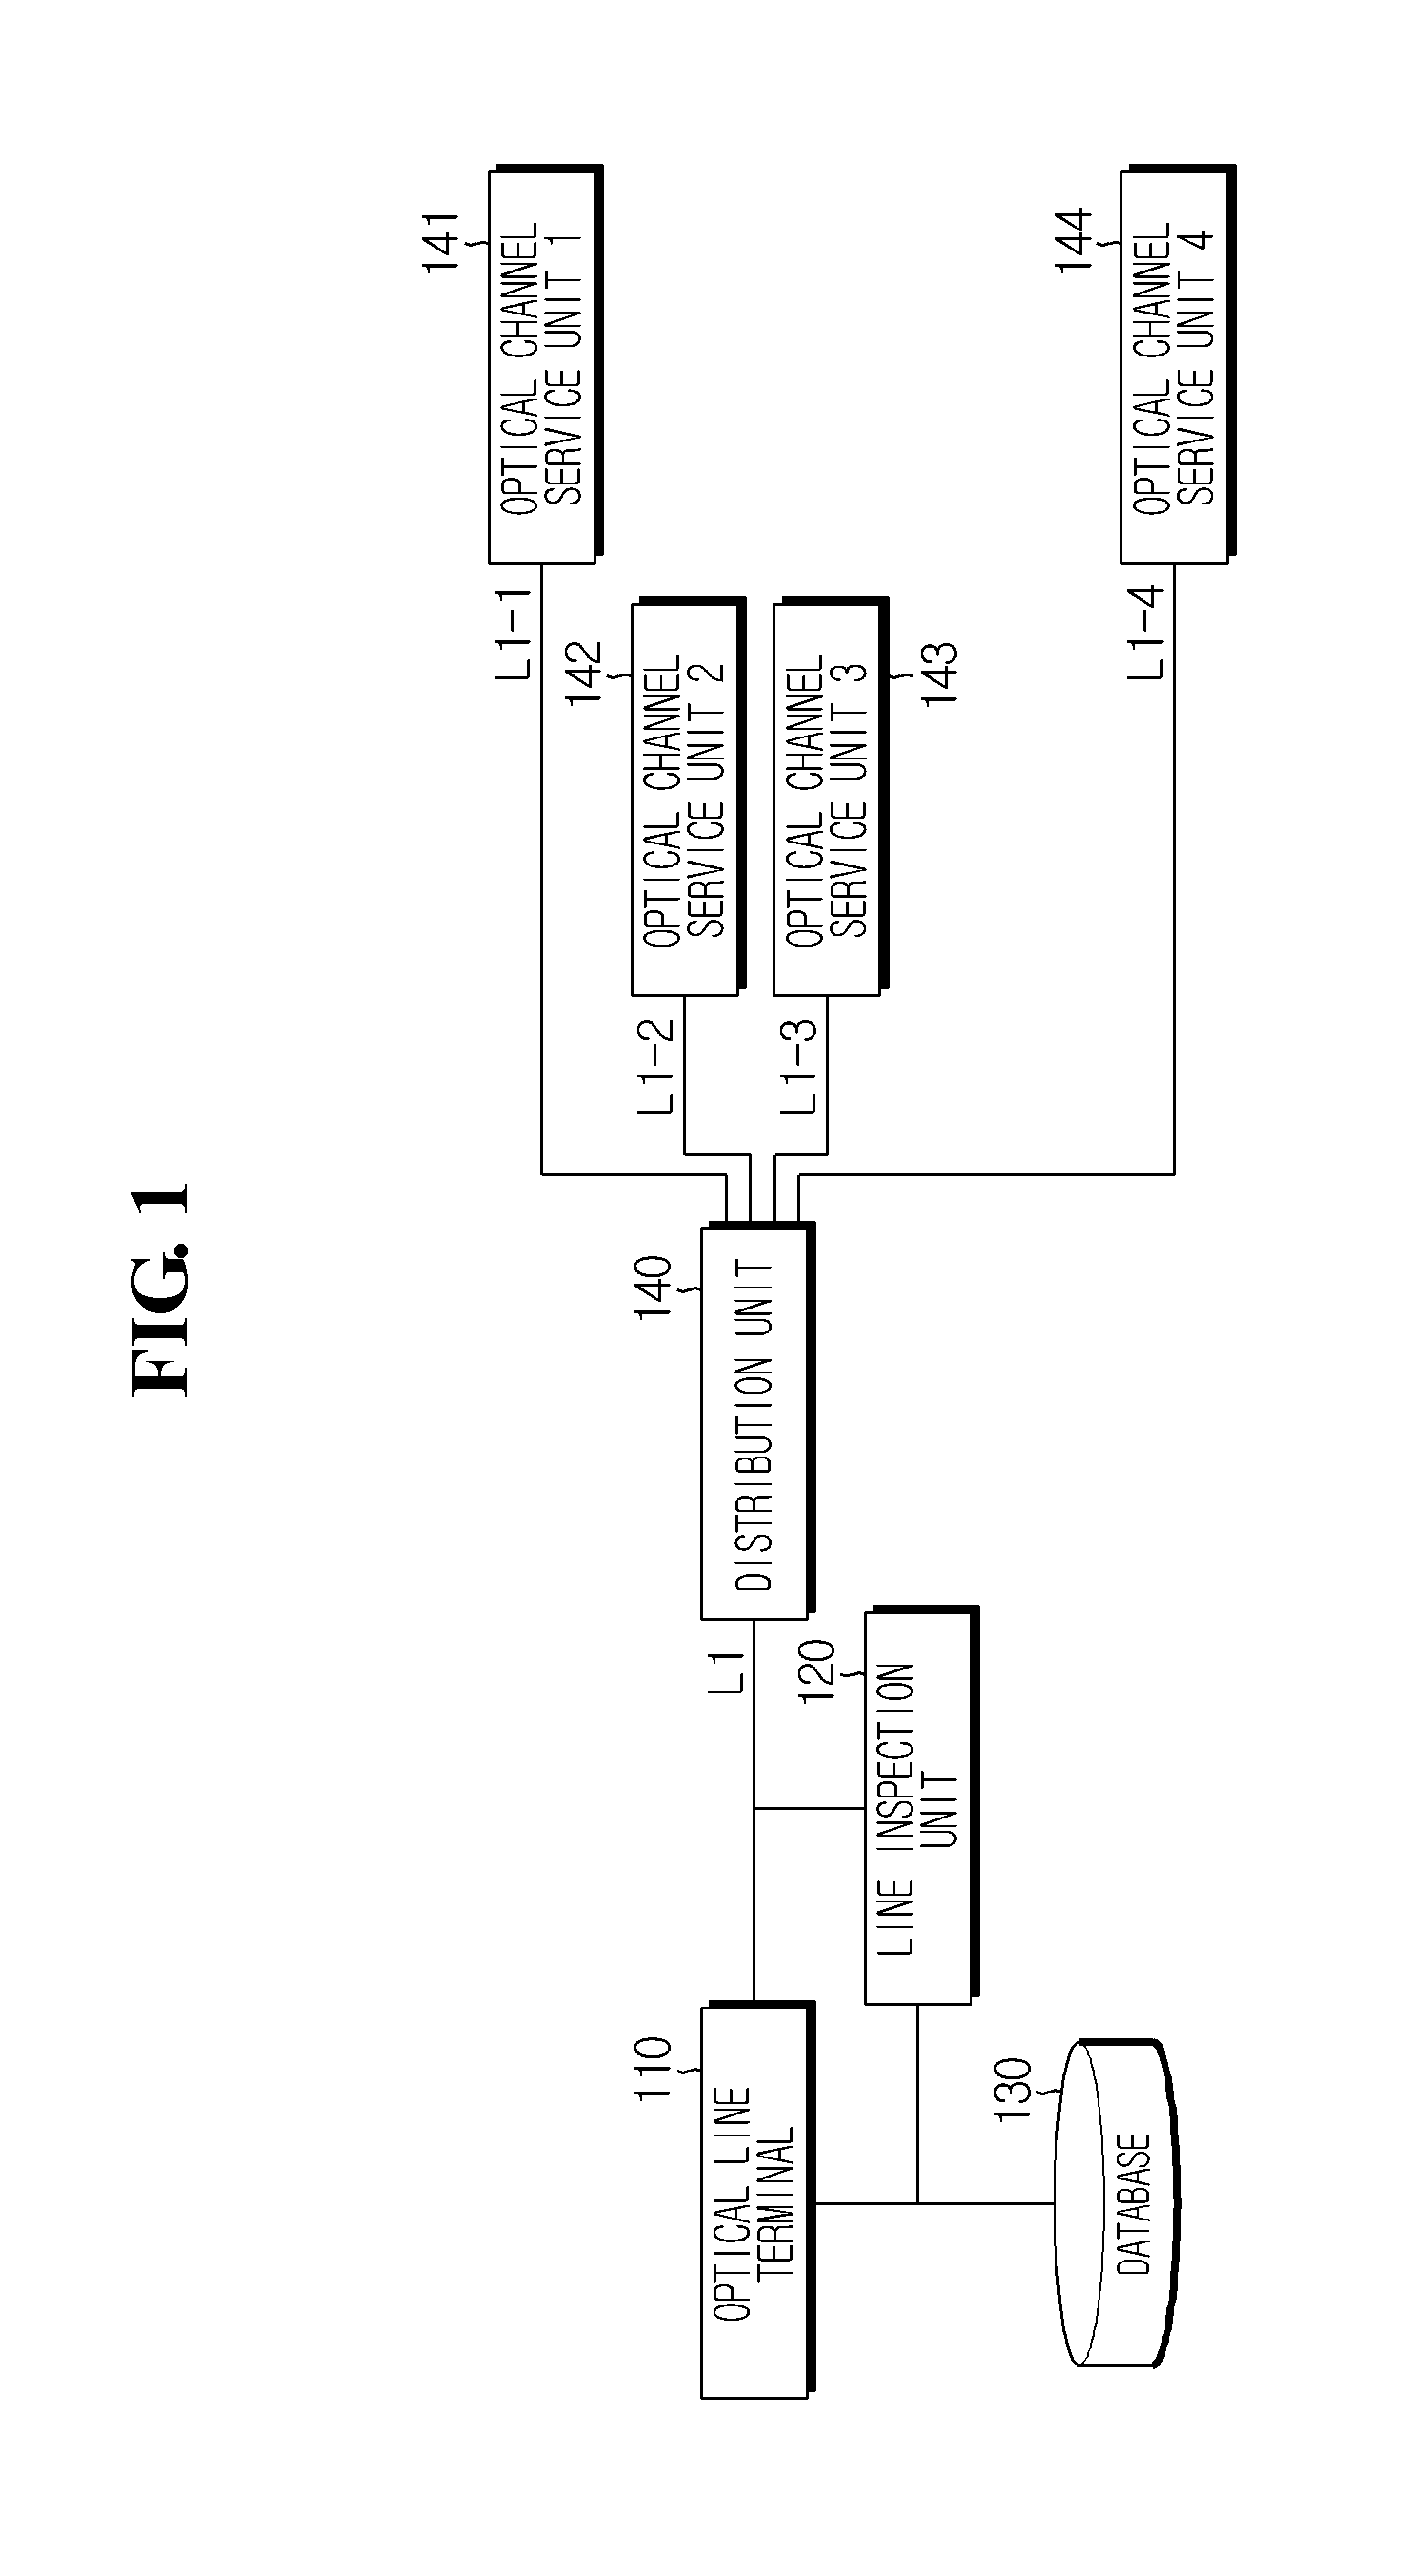 Optical line monitoring system and method